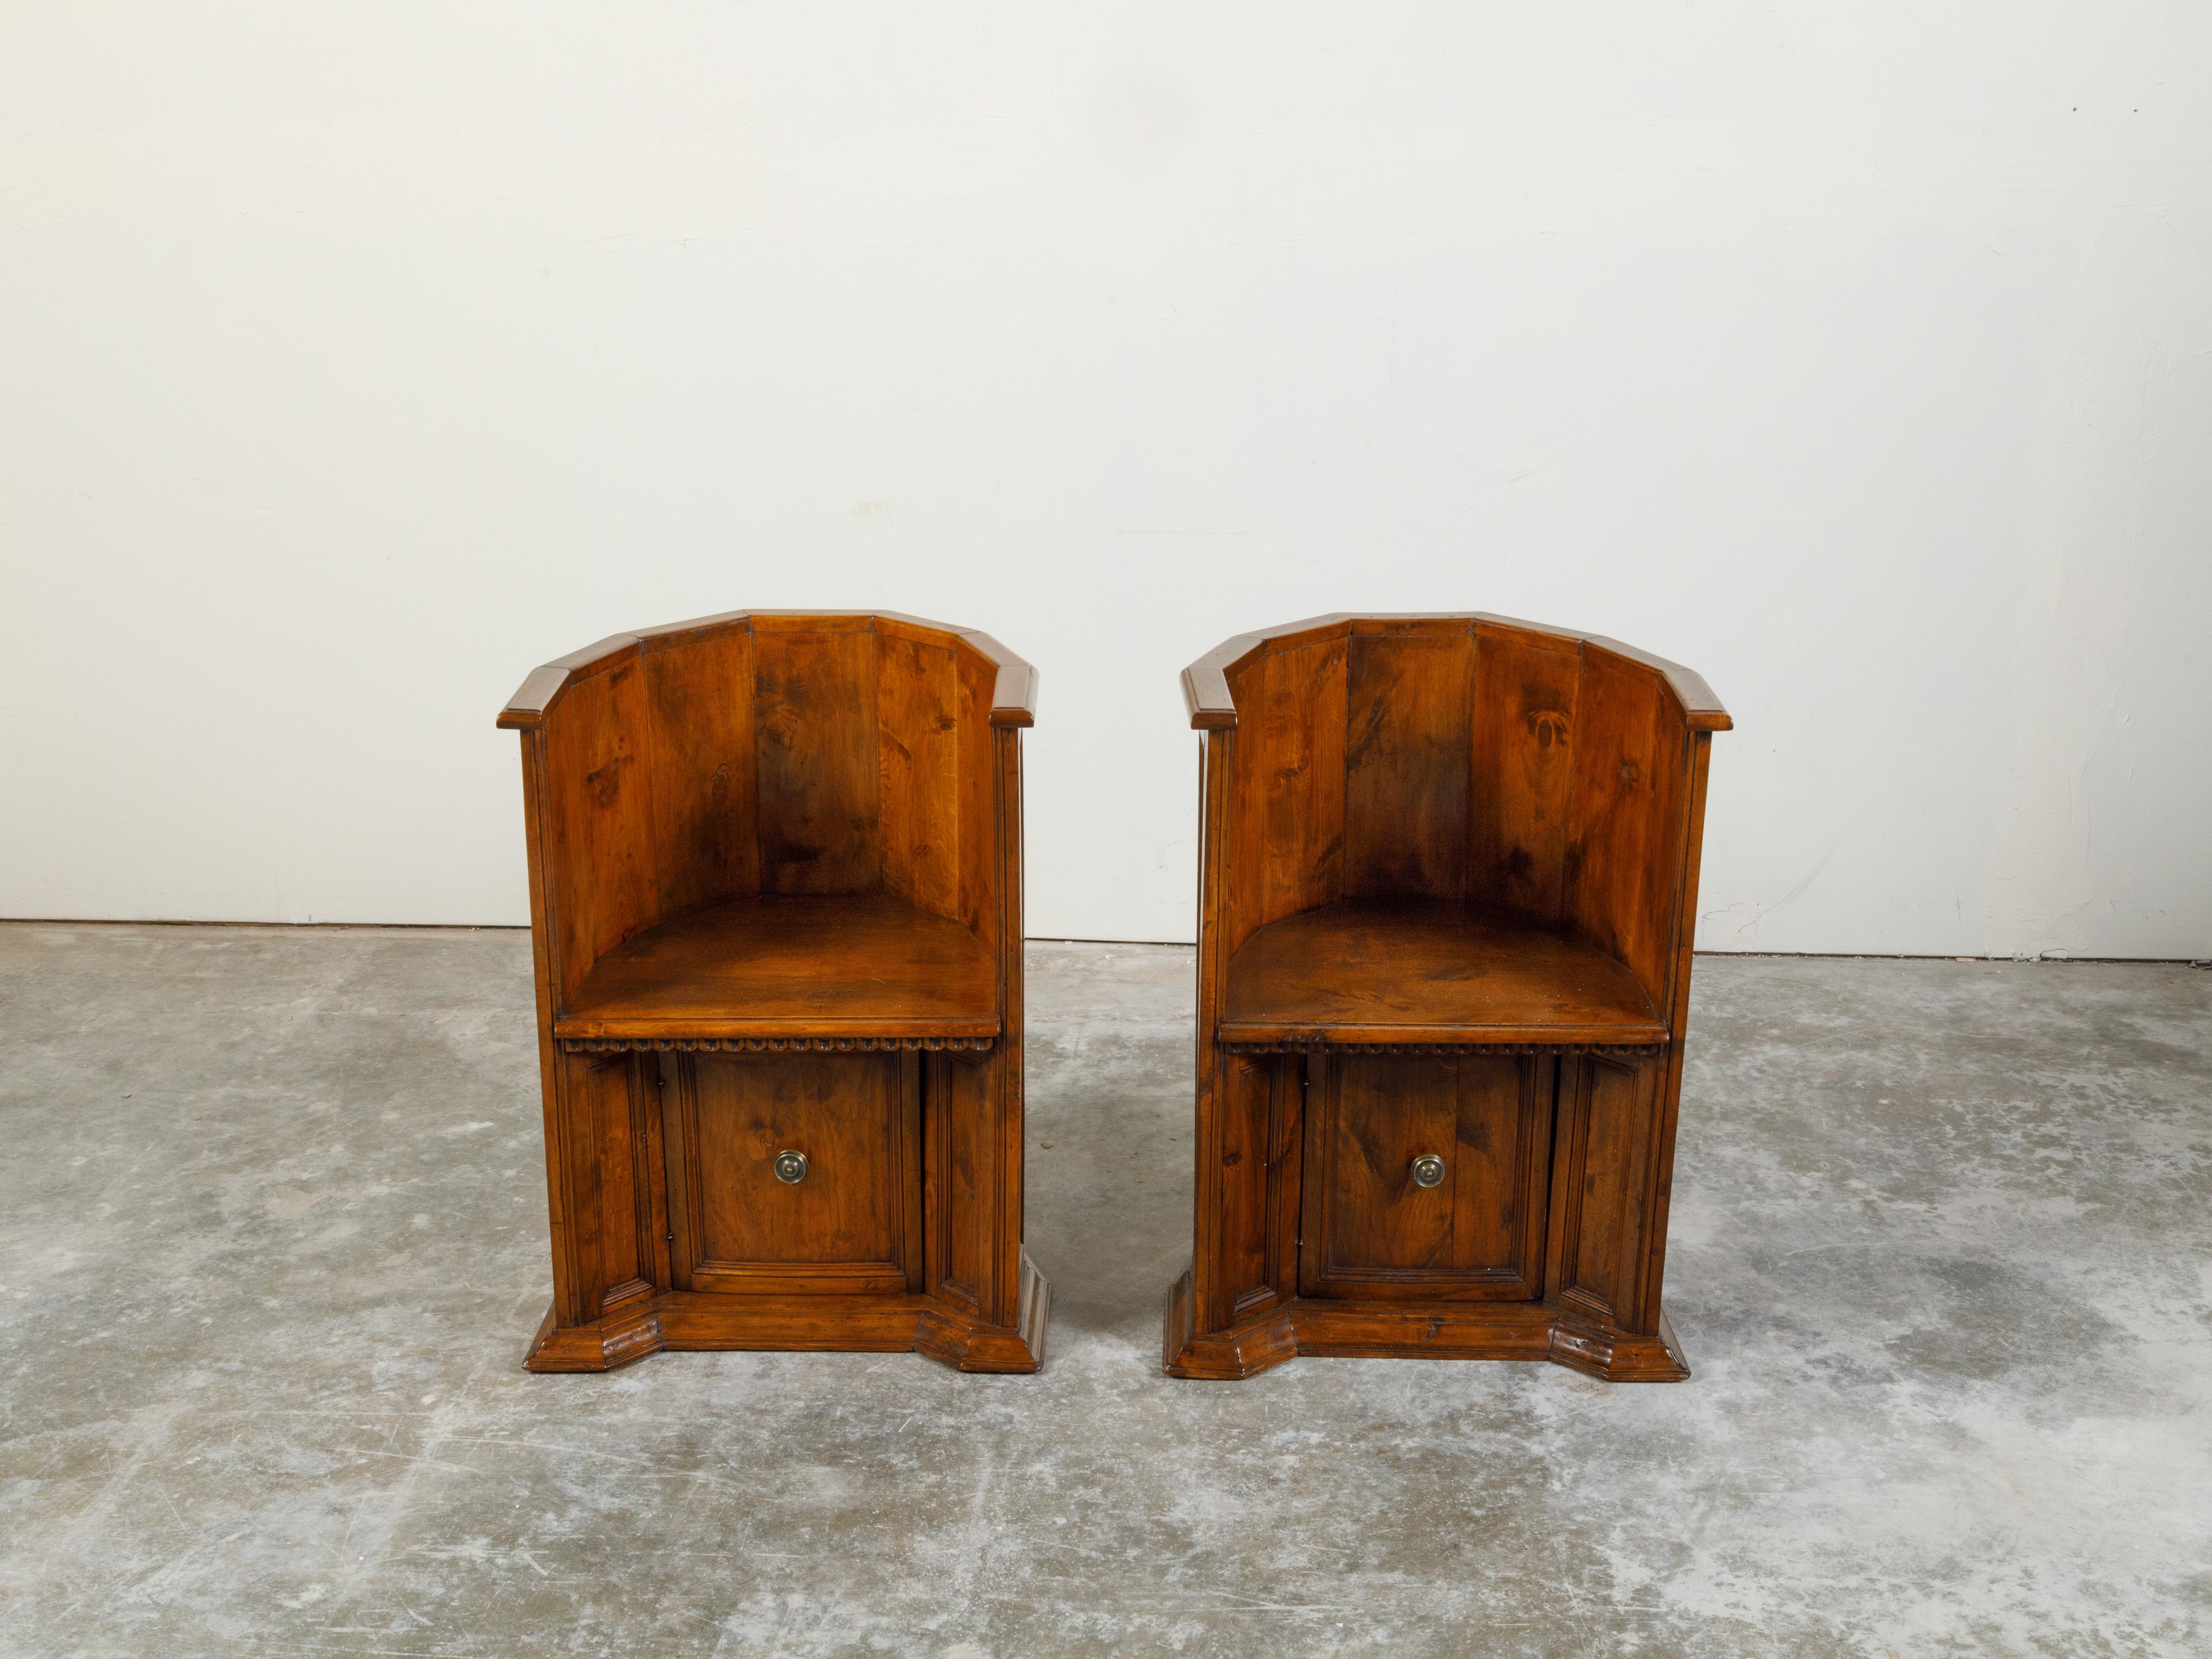 Pair of Italian 19th Century Renaissance Style Wooden Chairs with Lower Doors In Good Condition For Sale In Atlanta, GA